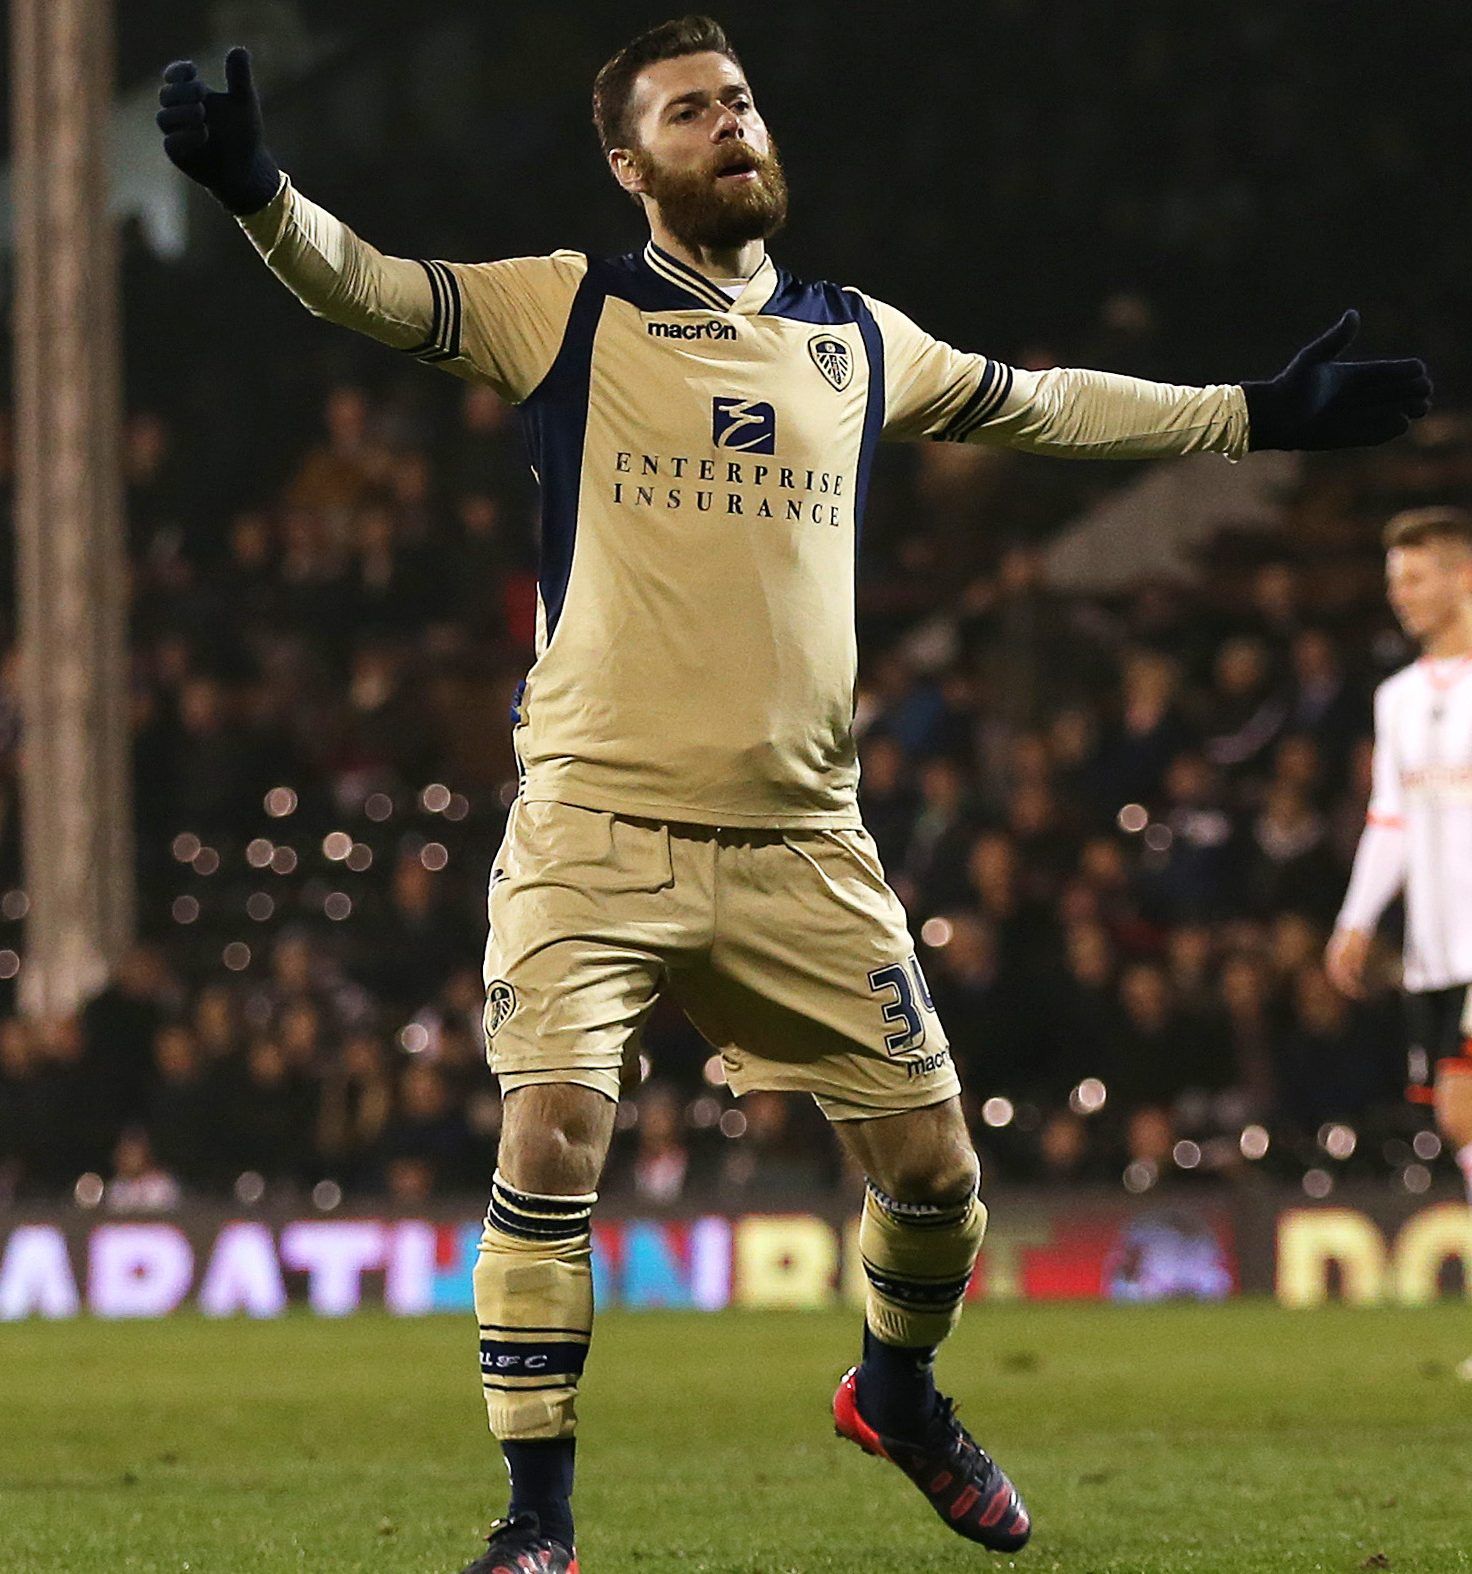 Football - Fulham v Leeds United - Sky Bet Football League Championship - Craven Cottage - 18/3/15 
Mirco Antenucci celebrates after scoring the third goal for Leeds 
Mandatory Credit: Action Images / Paul Childs 
Livepic 
EDITORIAL USE ONLY. No use with unauthorized audio, video, data, fixture lists, club/league logos or 